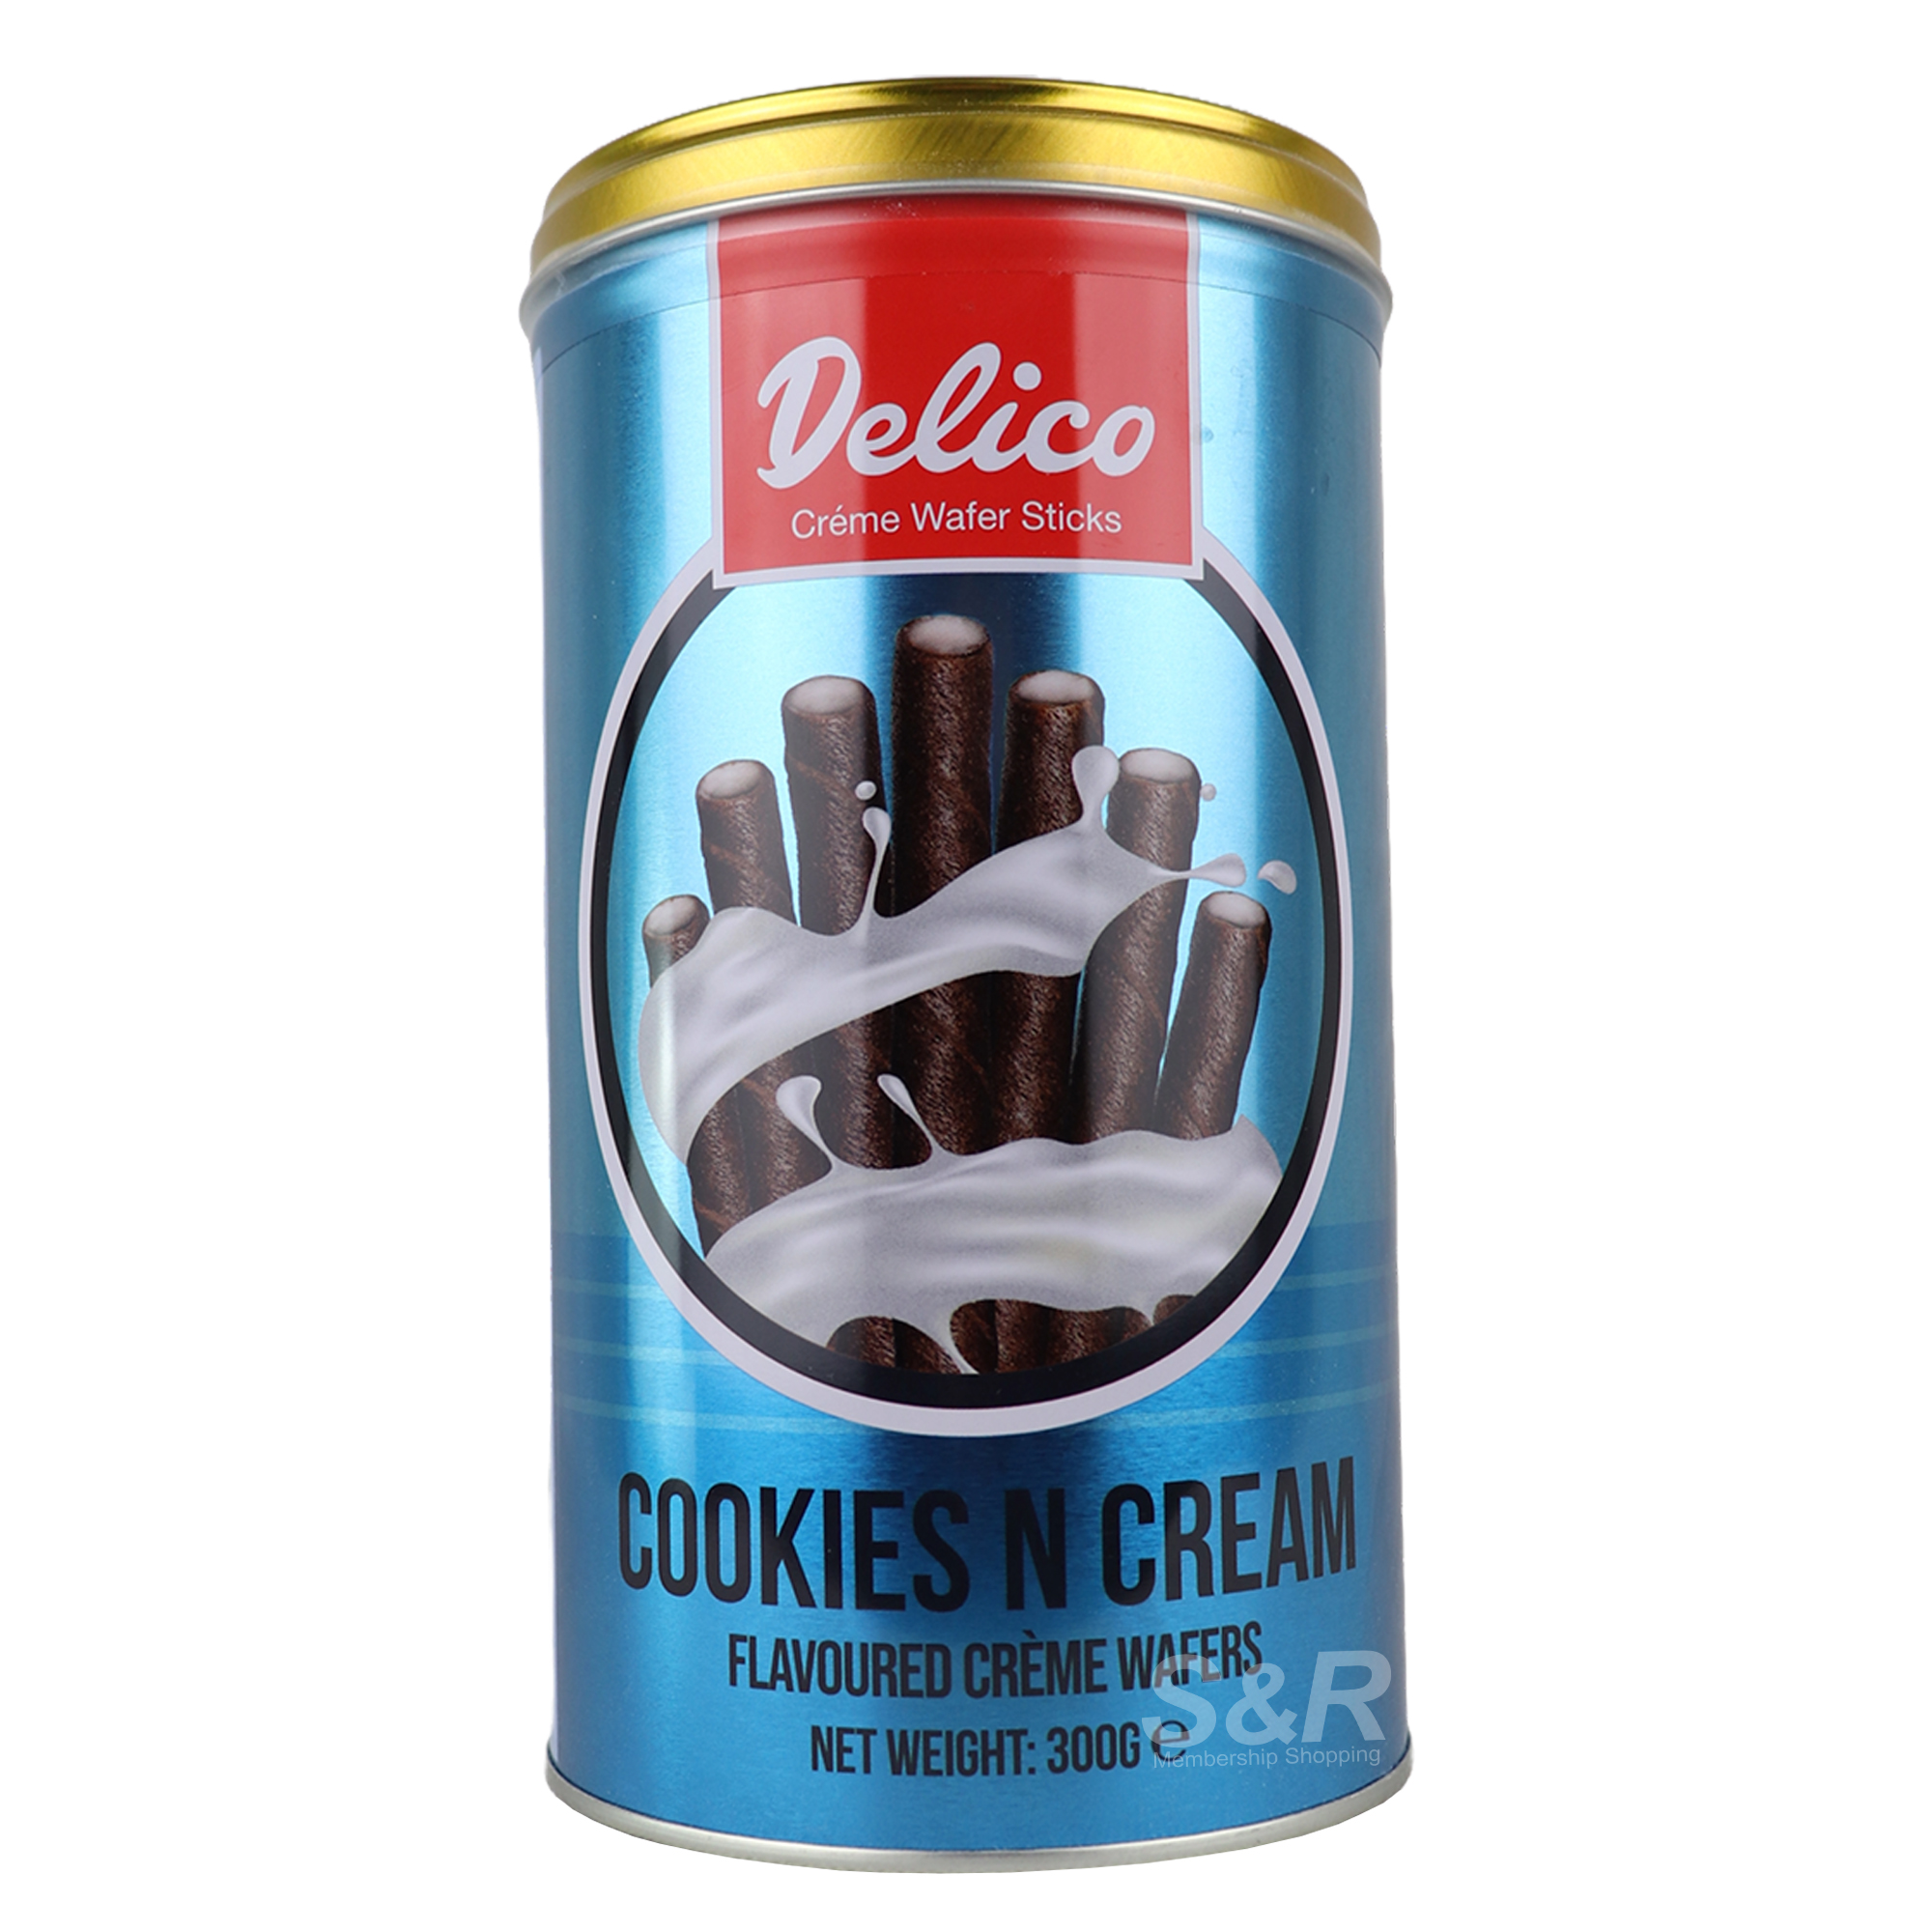 Delico Limited Edition Cookies & Cream Flavored Creme Wafer Sticks 300g